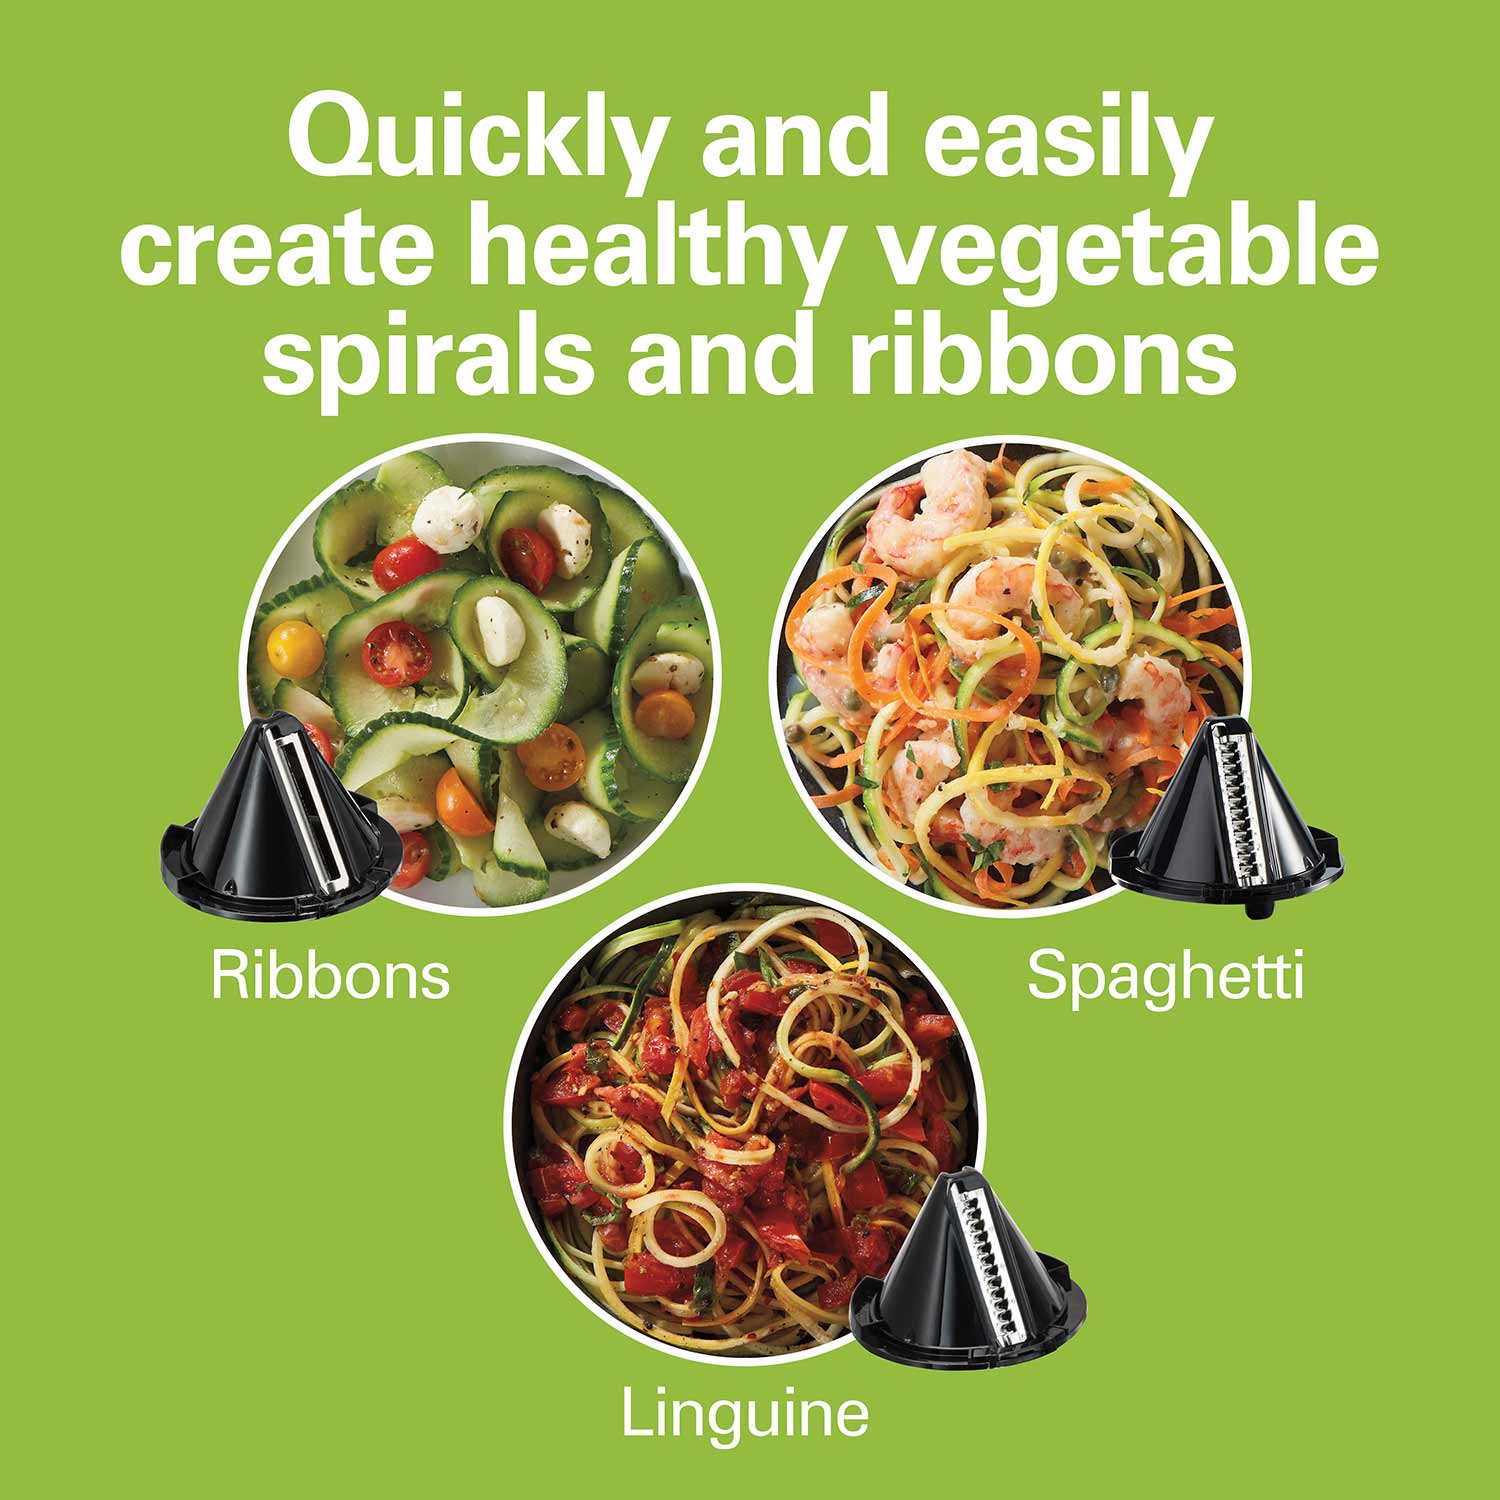 Hamilton Beach 3-in-1 Electric Vegetable Spiralizer & Slicer With 3 Cutting  Cones for Veggie Spaghetti, Linguine, and Ribbons, 6-Cups, Black,70930